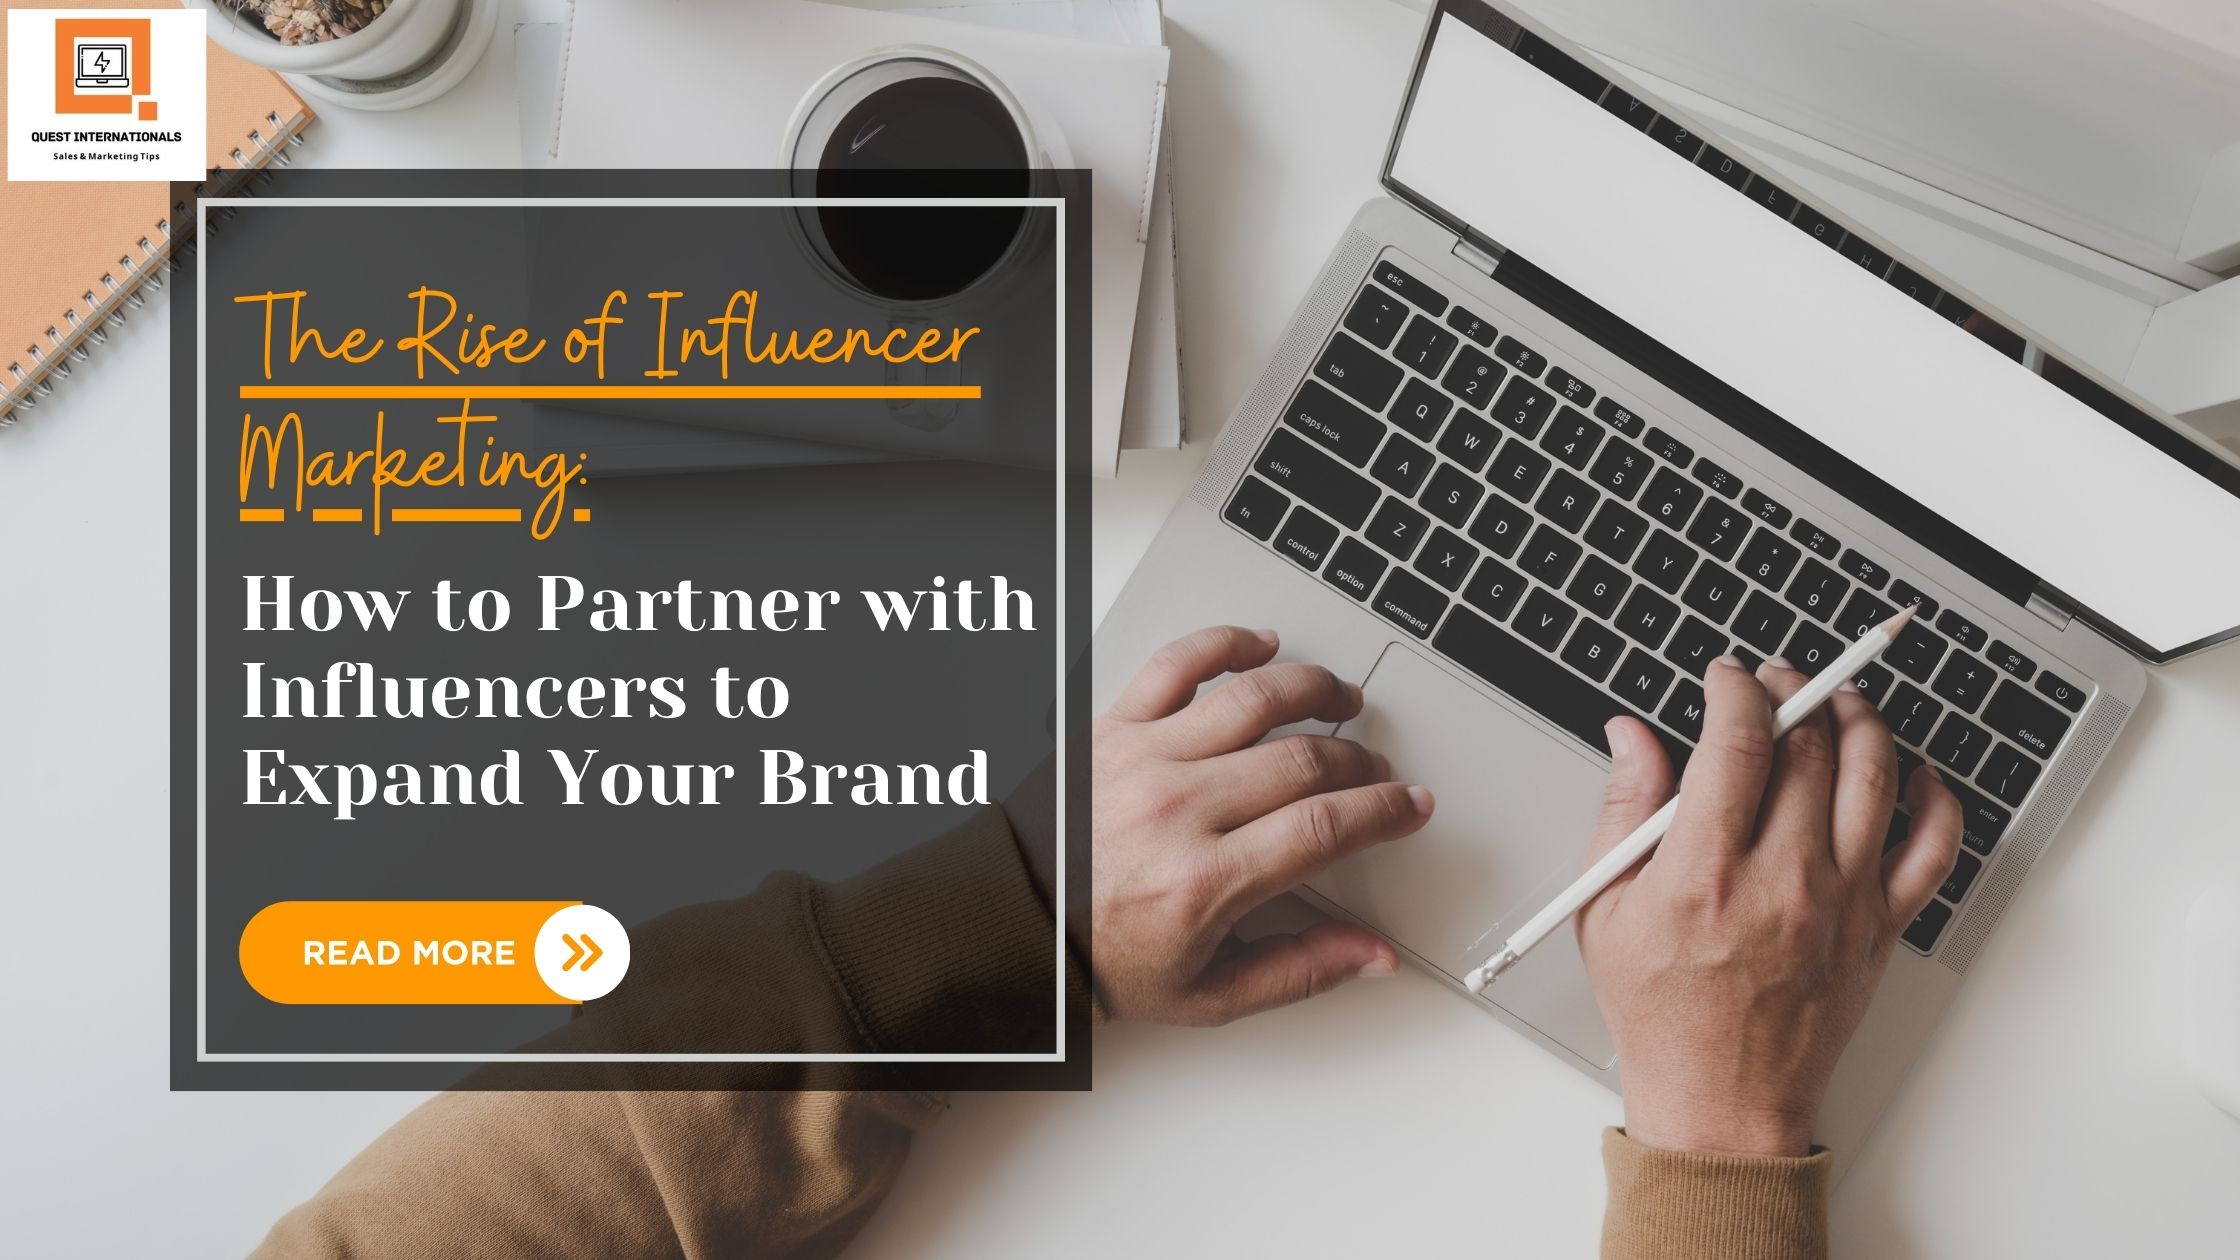 You are currently viewing The Rise of Influencer Marketing: How to Partner with Influencers to Expand Your Brand